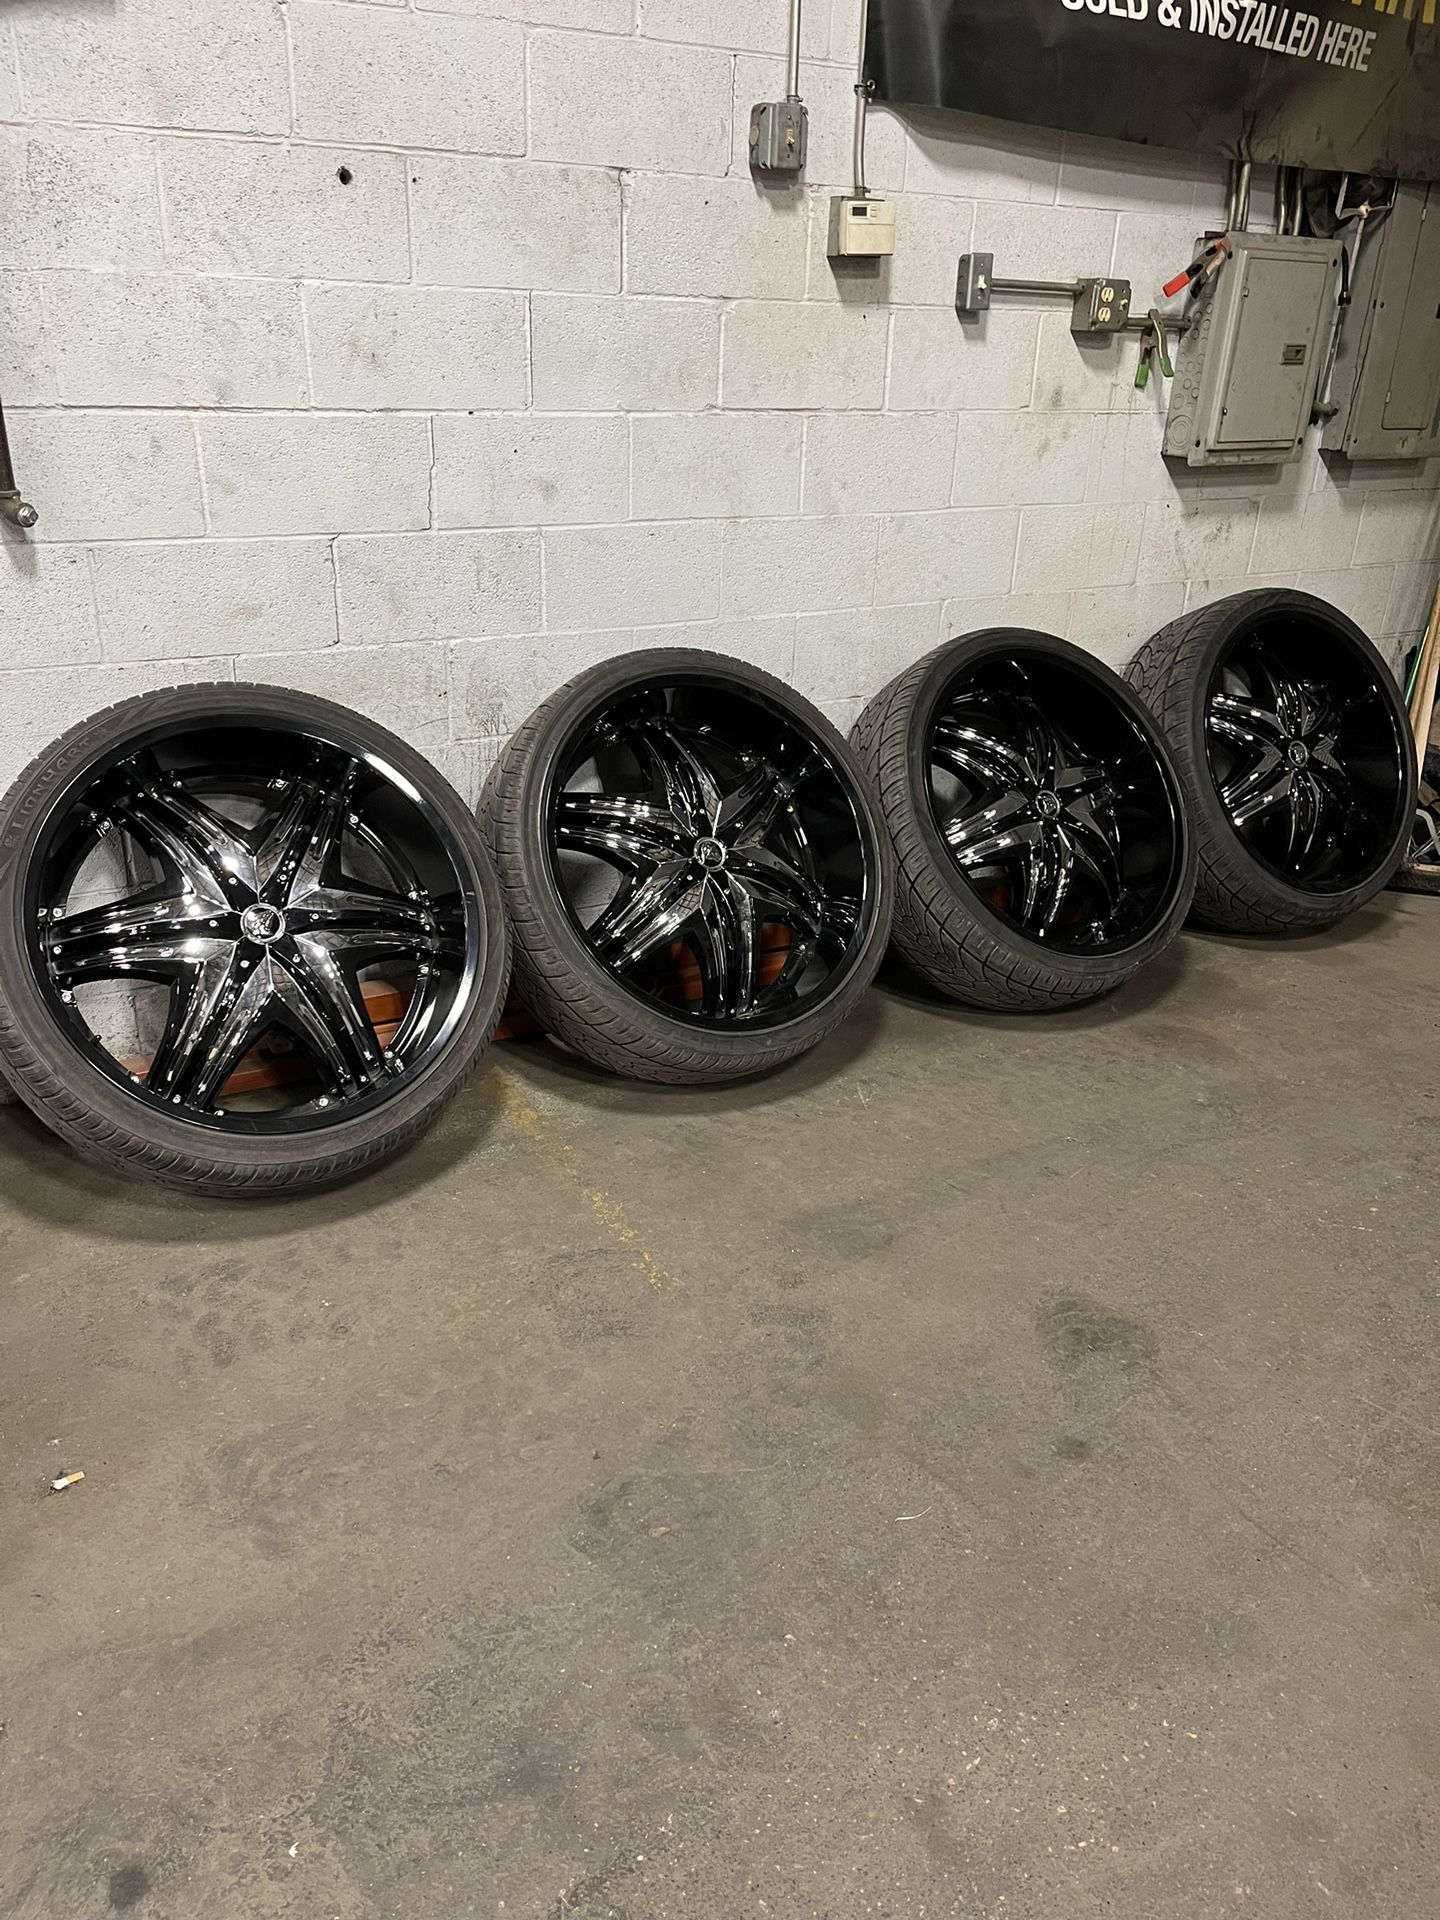 26” Gloss Black With Chrome Inserts 305/30/26 Tires 6 Lug Chevy Cadillac GMC 